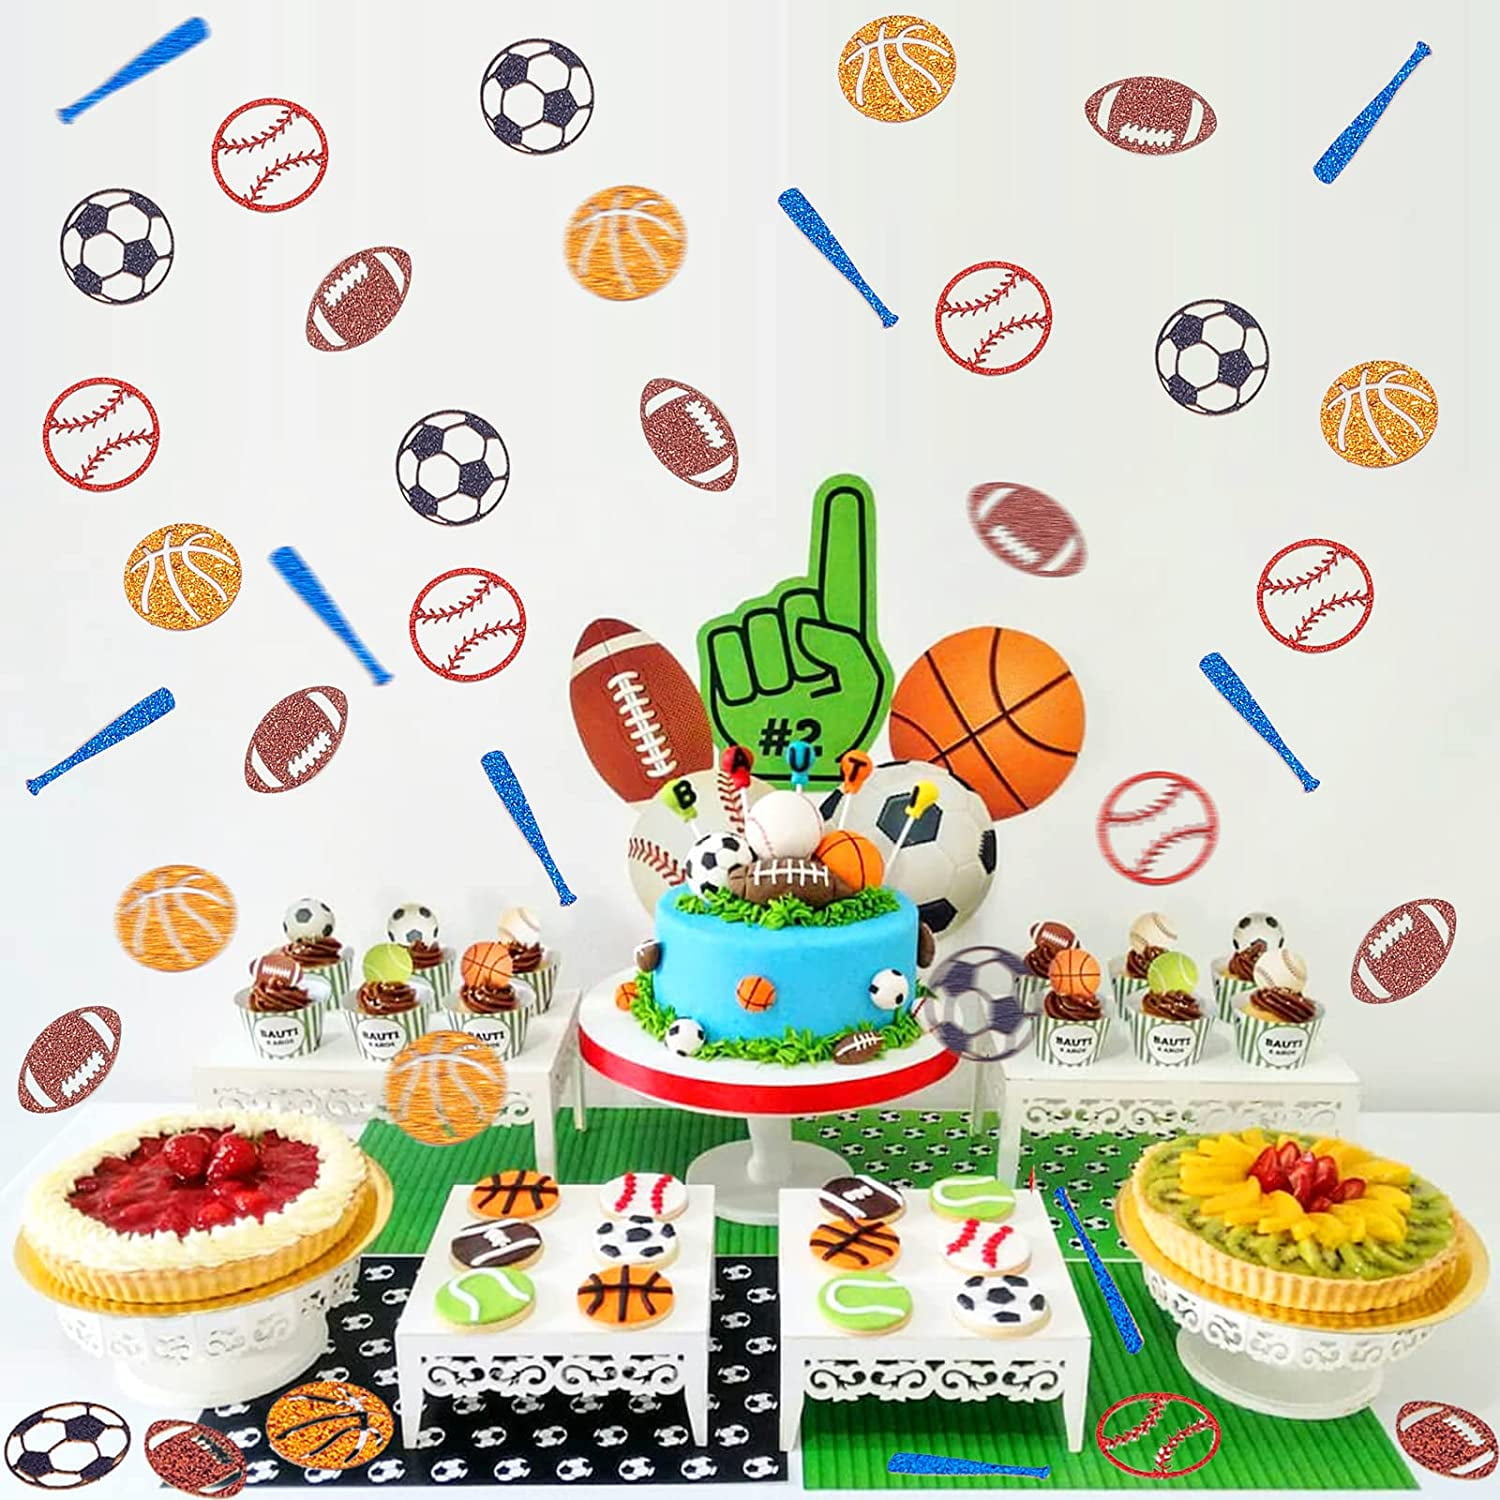 Sports novelty cakes usually for men! | Inspired By Michelle